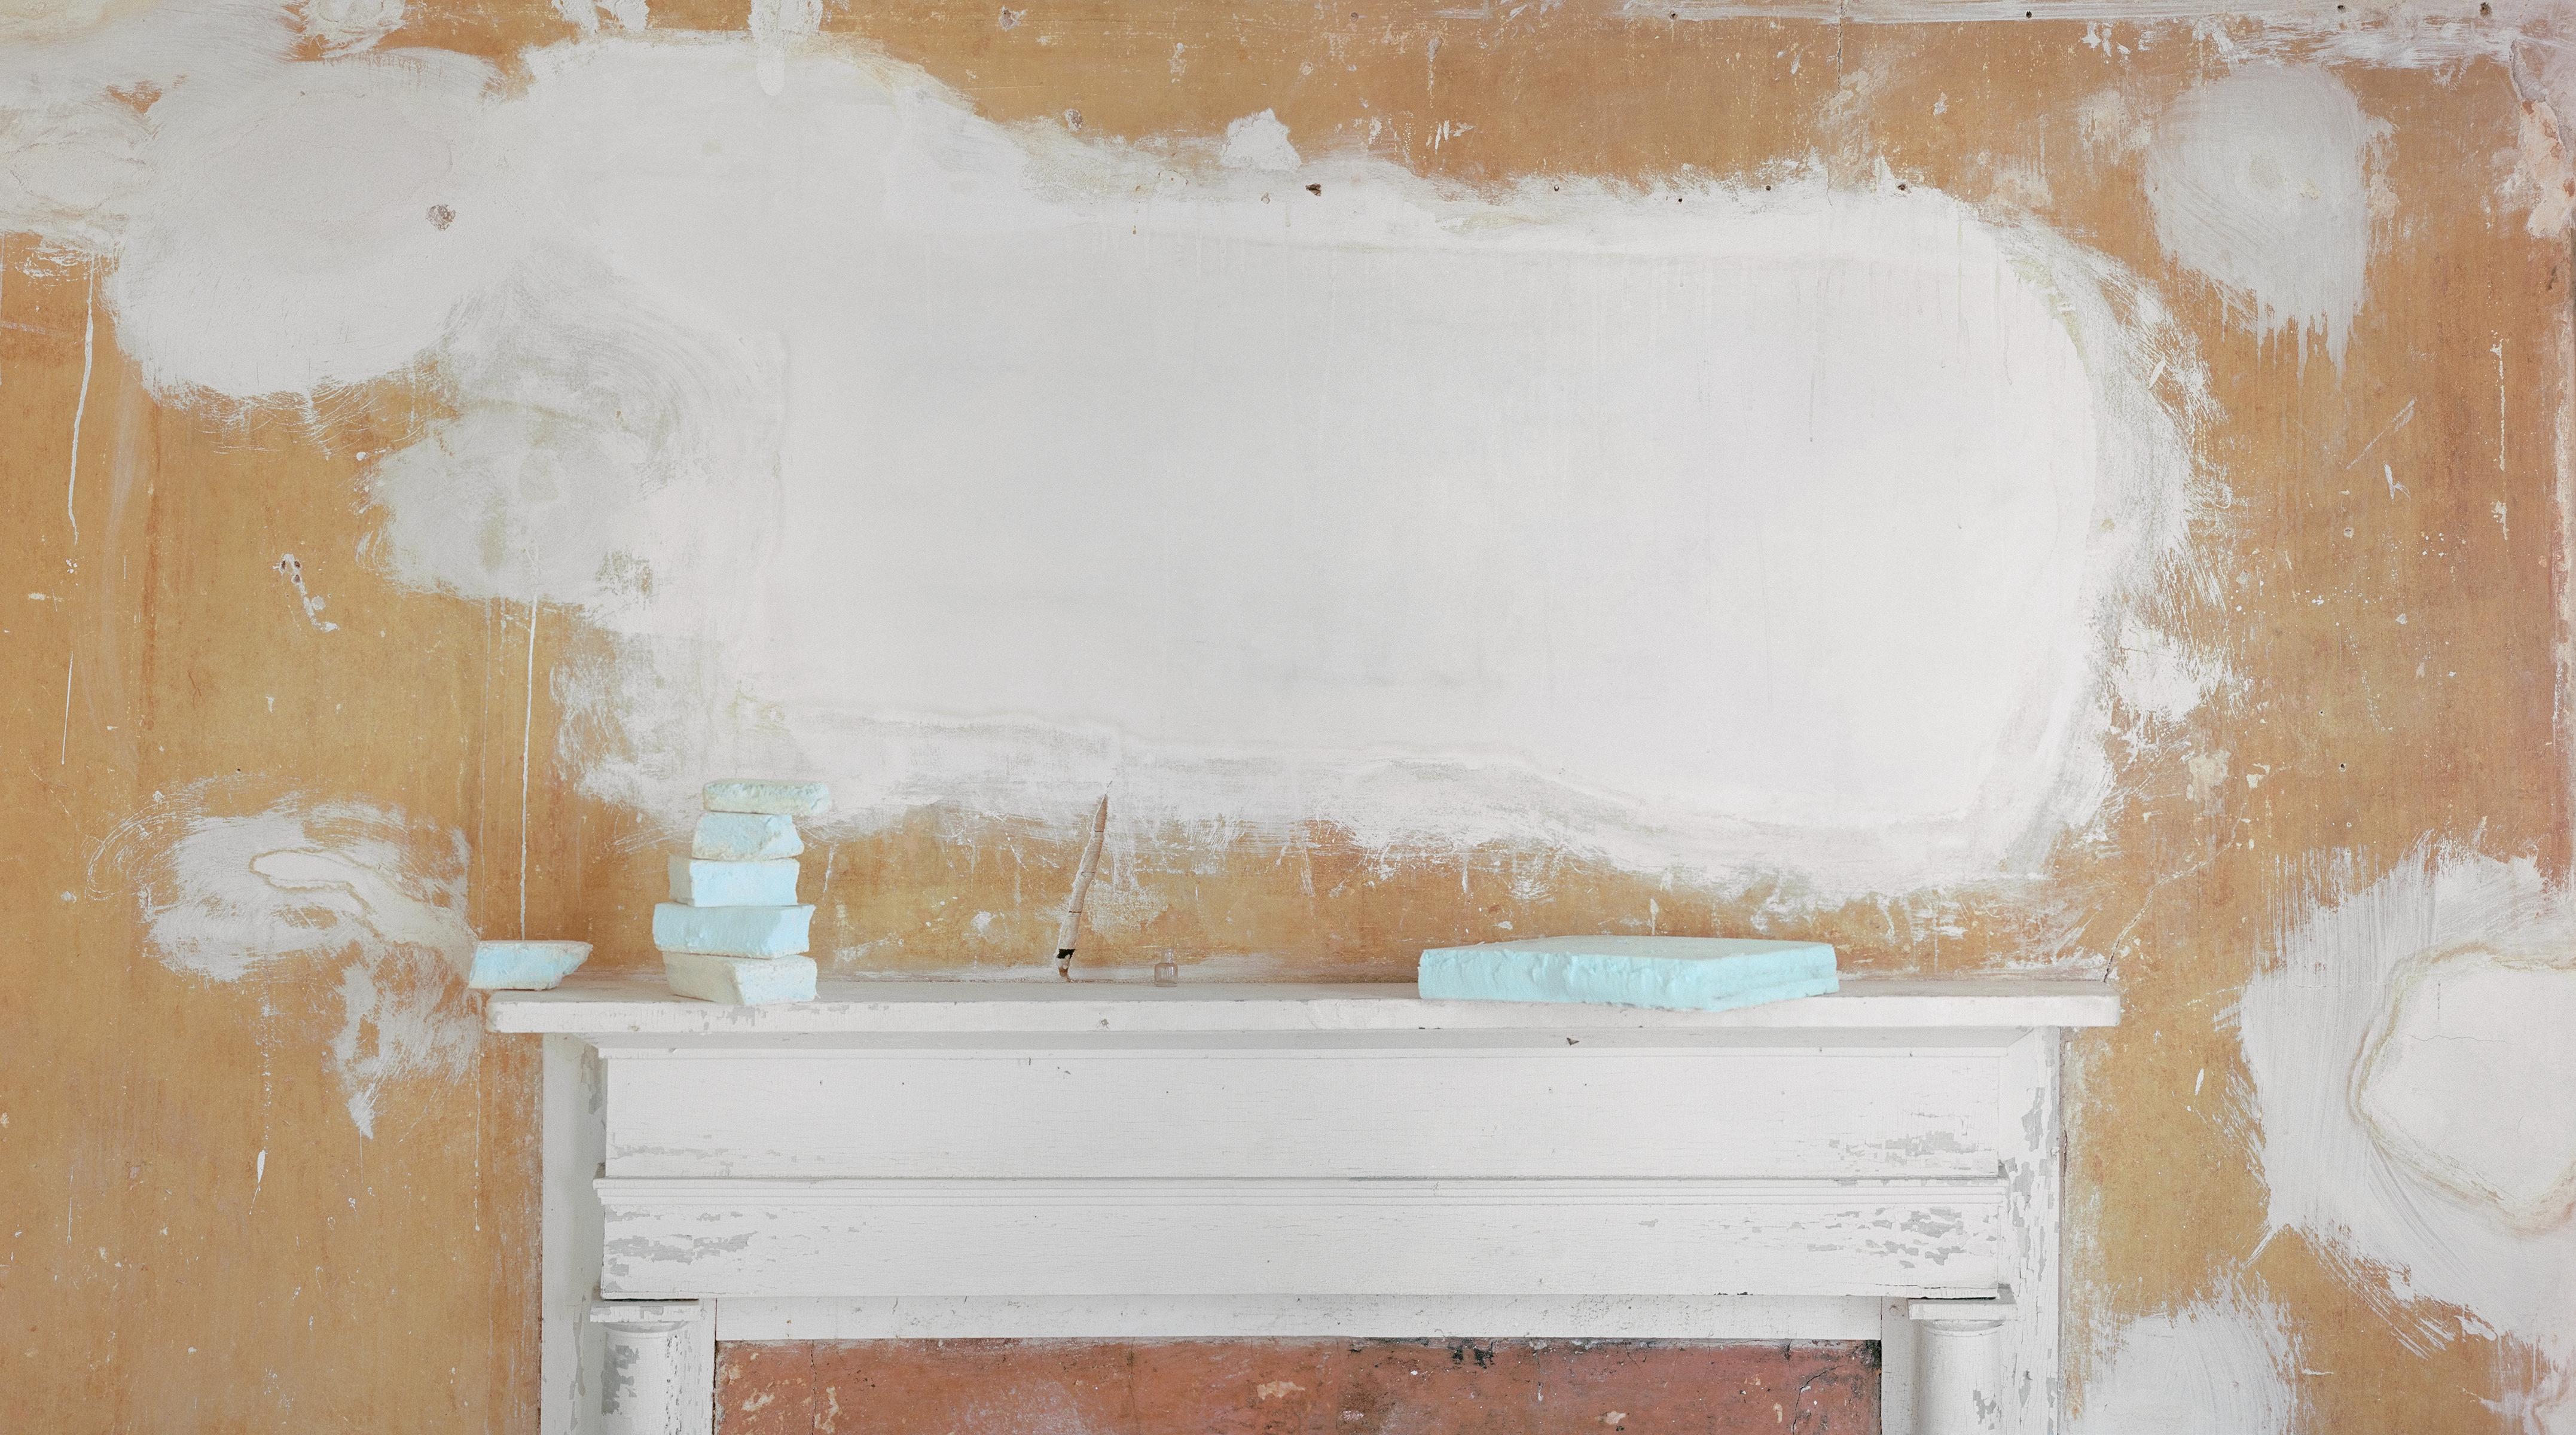 David Halliday Still-Life Photograph - Plaster Clouds (Photograph of an Exposed Wall and Antique Mantle Piece)